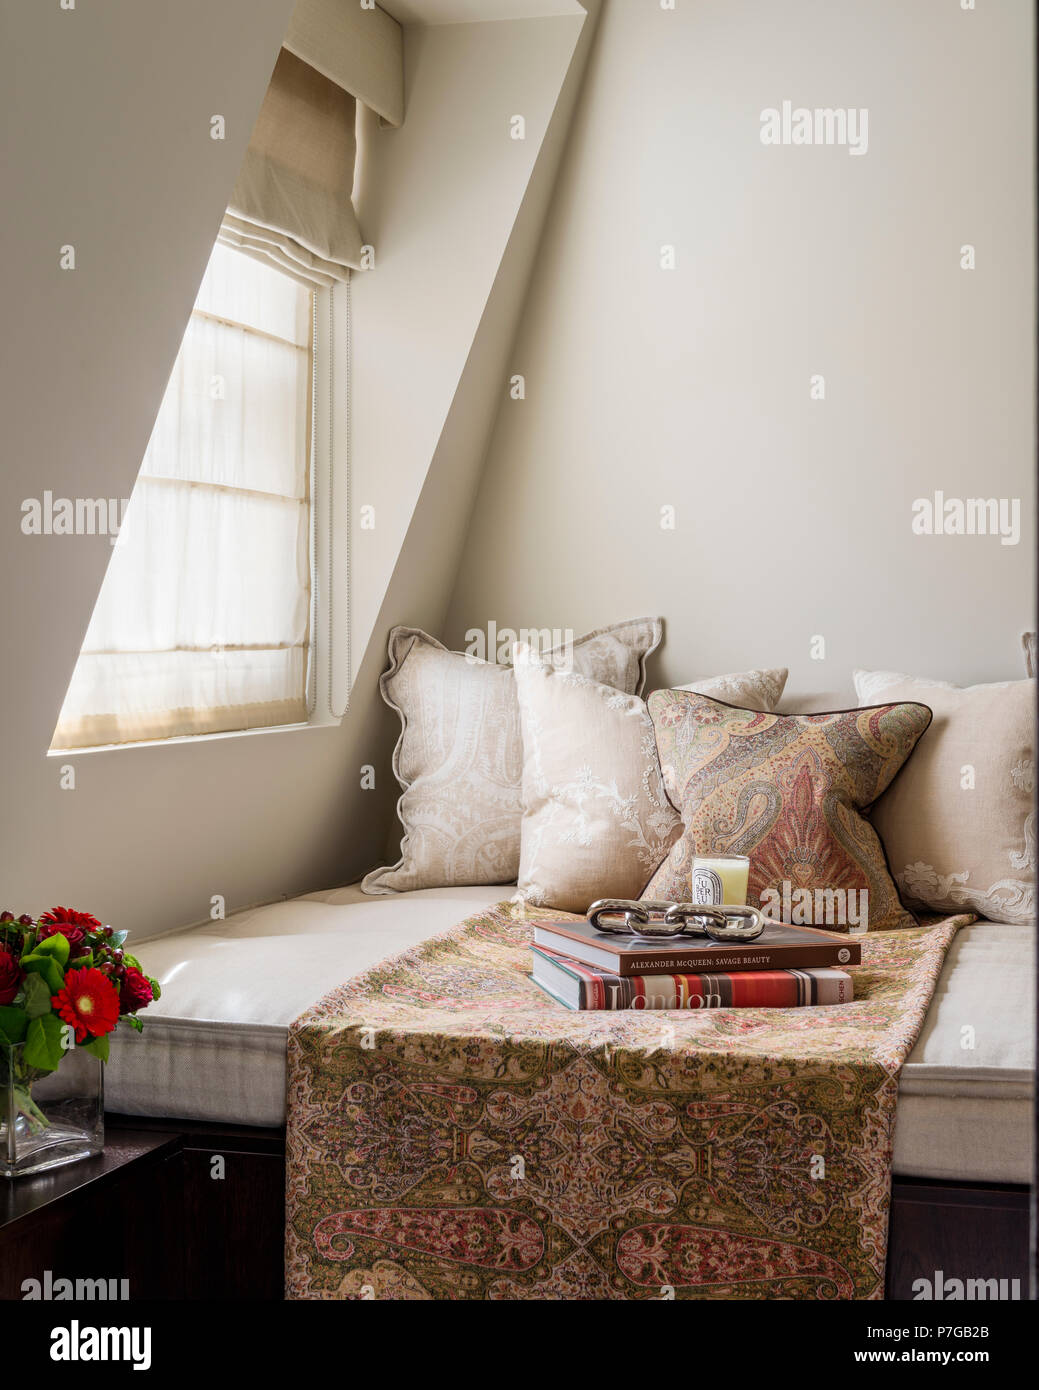 Daybed under window Stock Photo